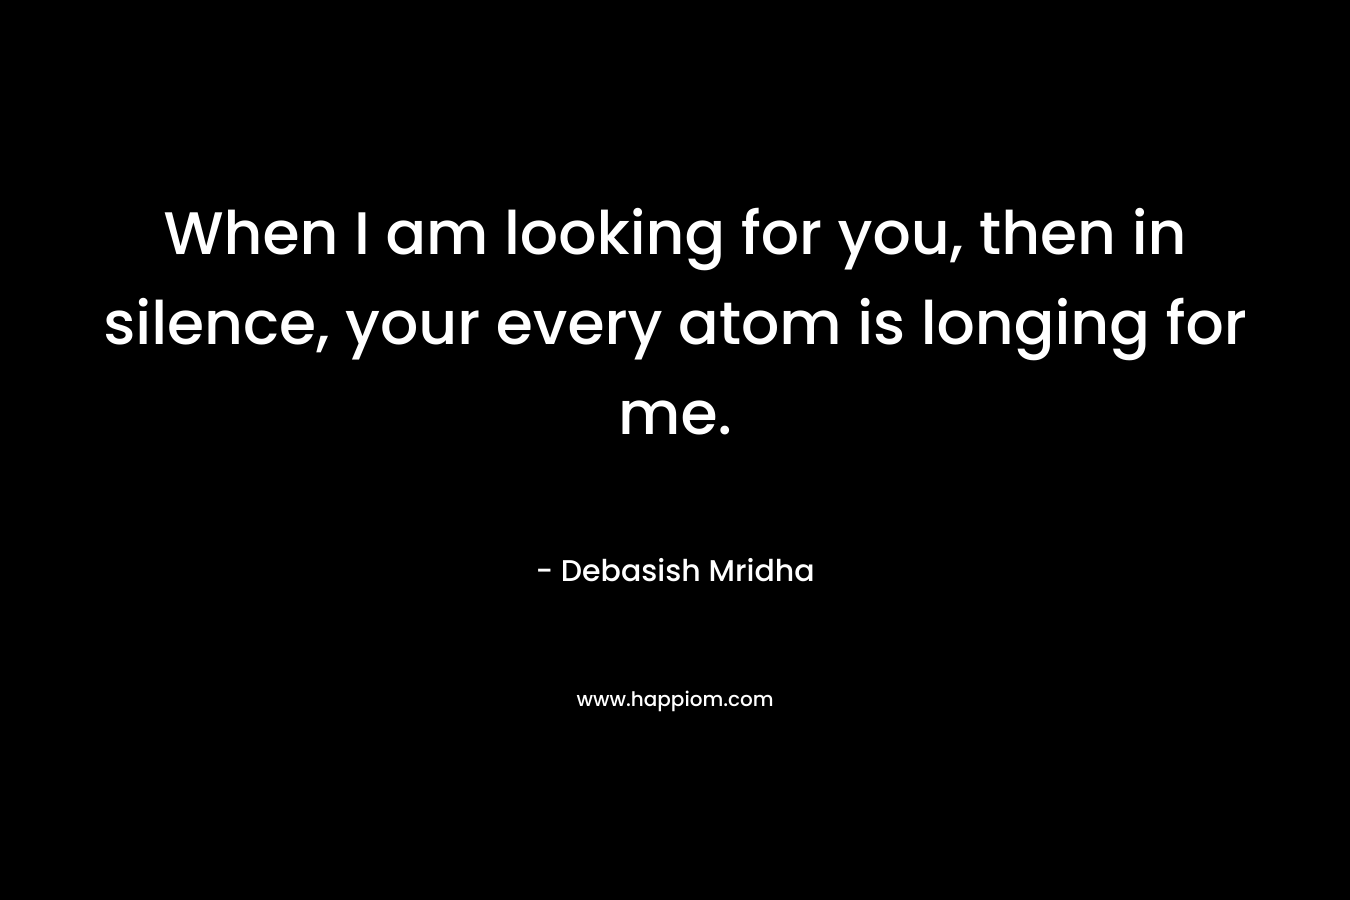 When I am looking for you, then in silence, your every atom is longing for me. – Debasish Mridha